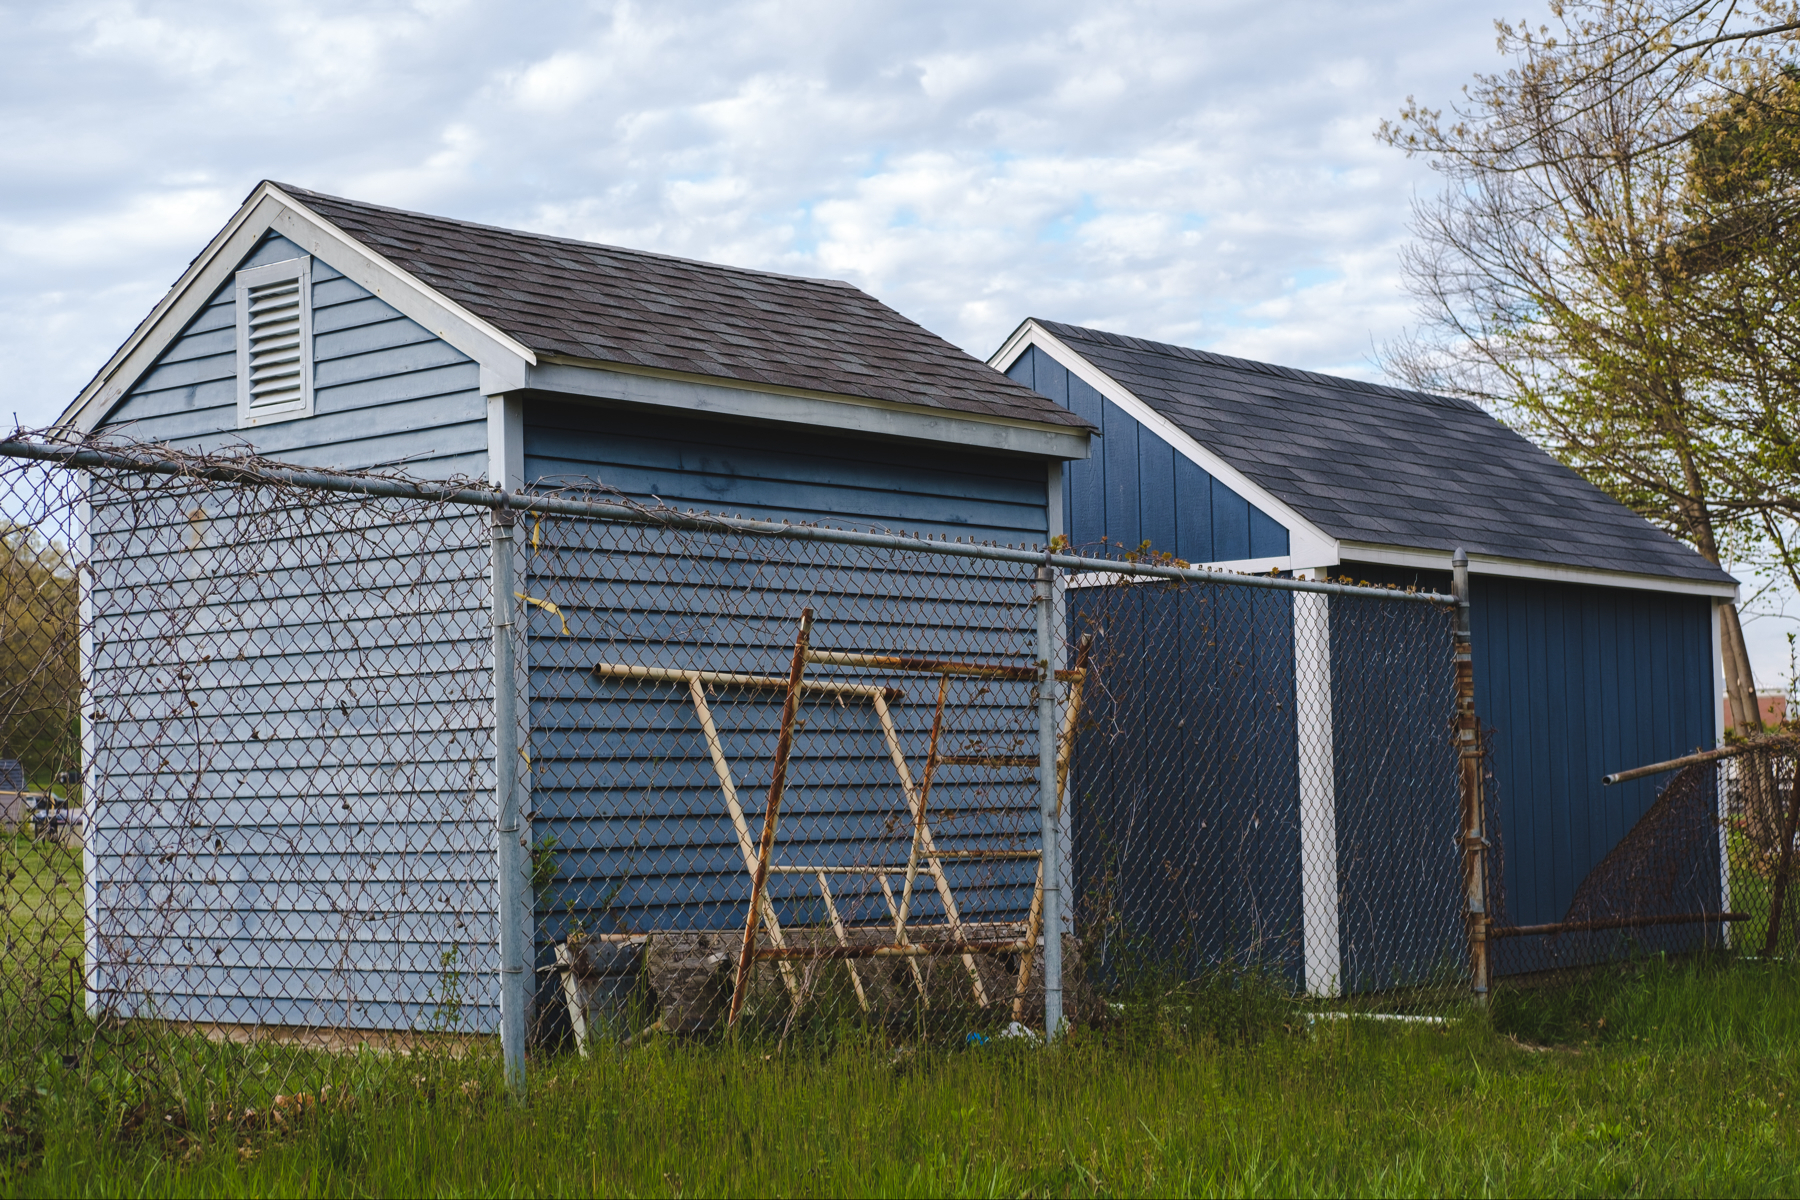 Two blue sheds enclosed by a chain-link fence with rusted metal frames leaning against them